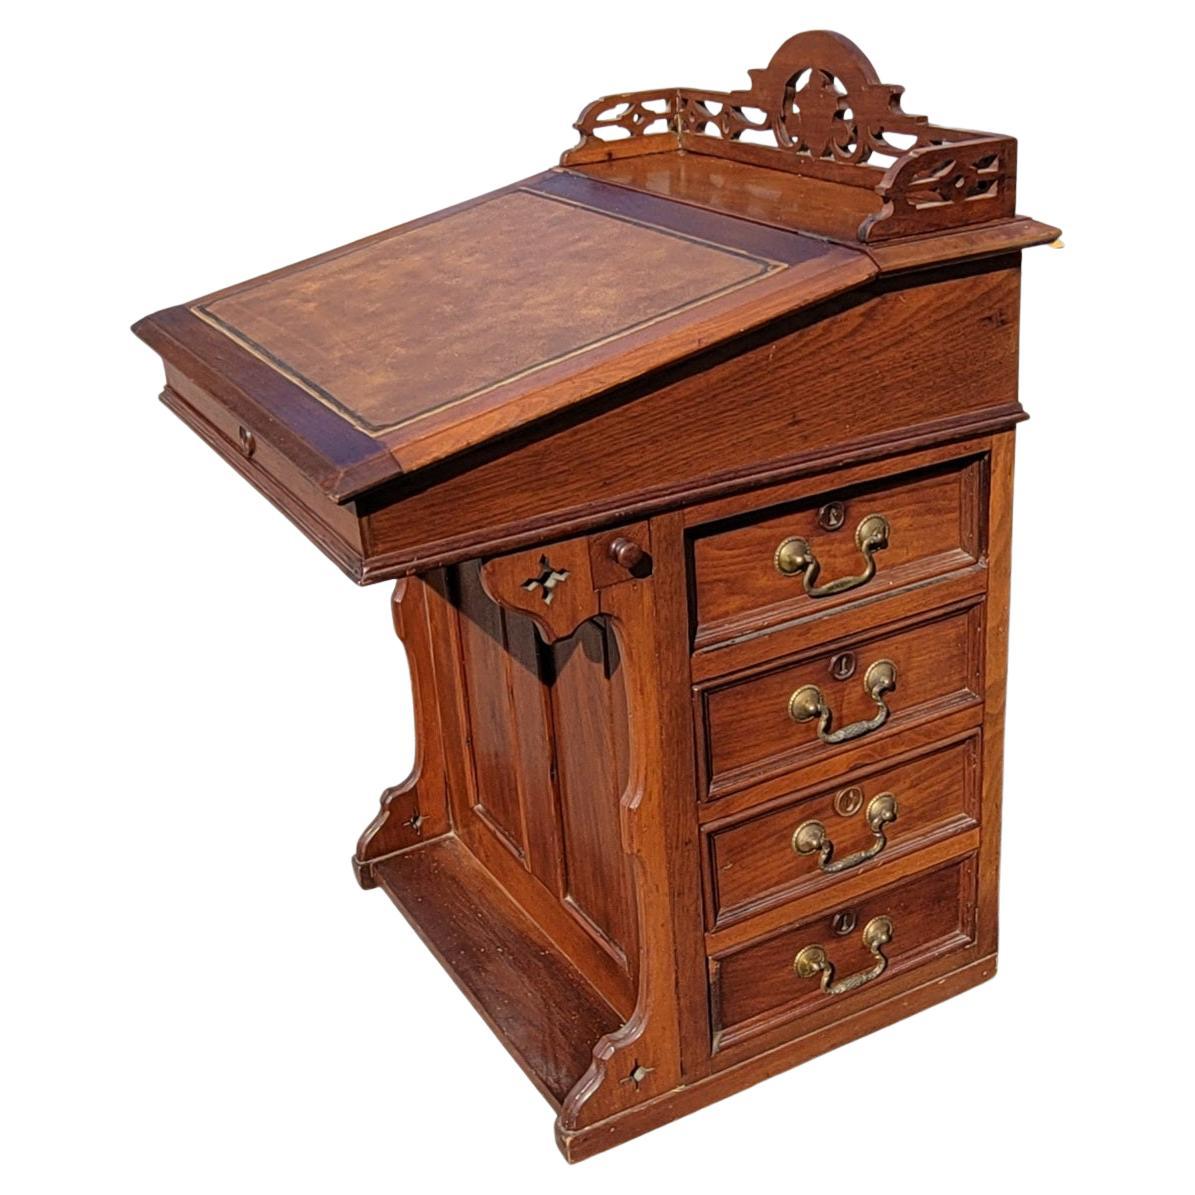 5-Drawer Mahogany Davenport Desk with Tooled Leather Top and Gallery For Sale